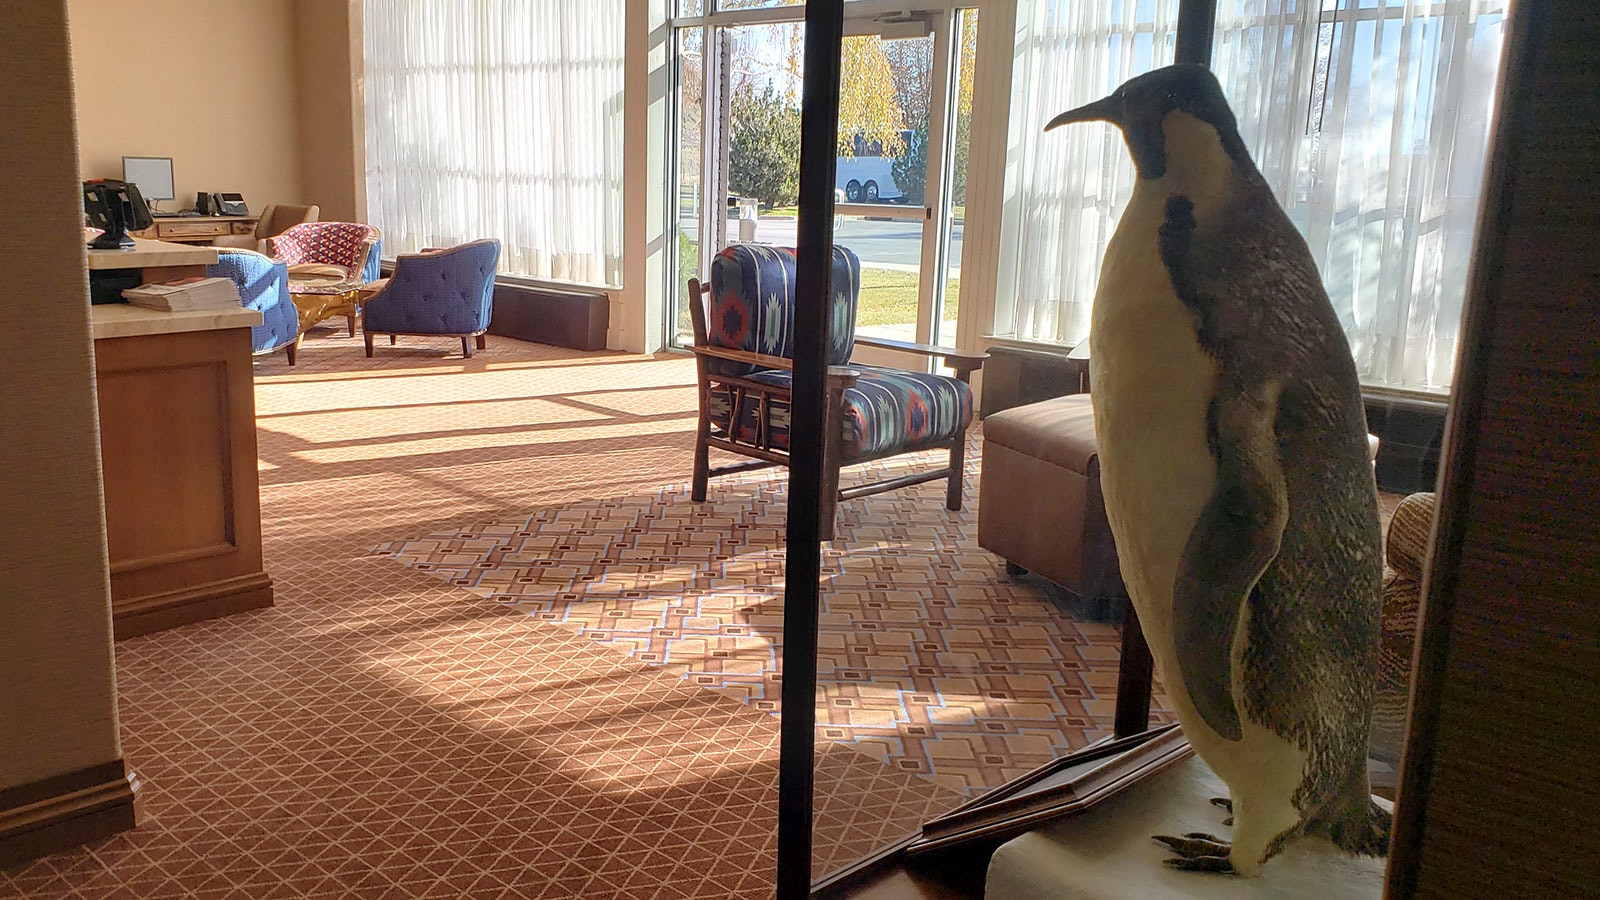 Little America's penguin mascot looks on from the hotel lobby.